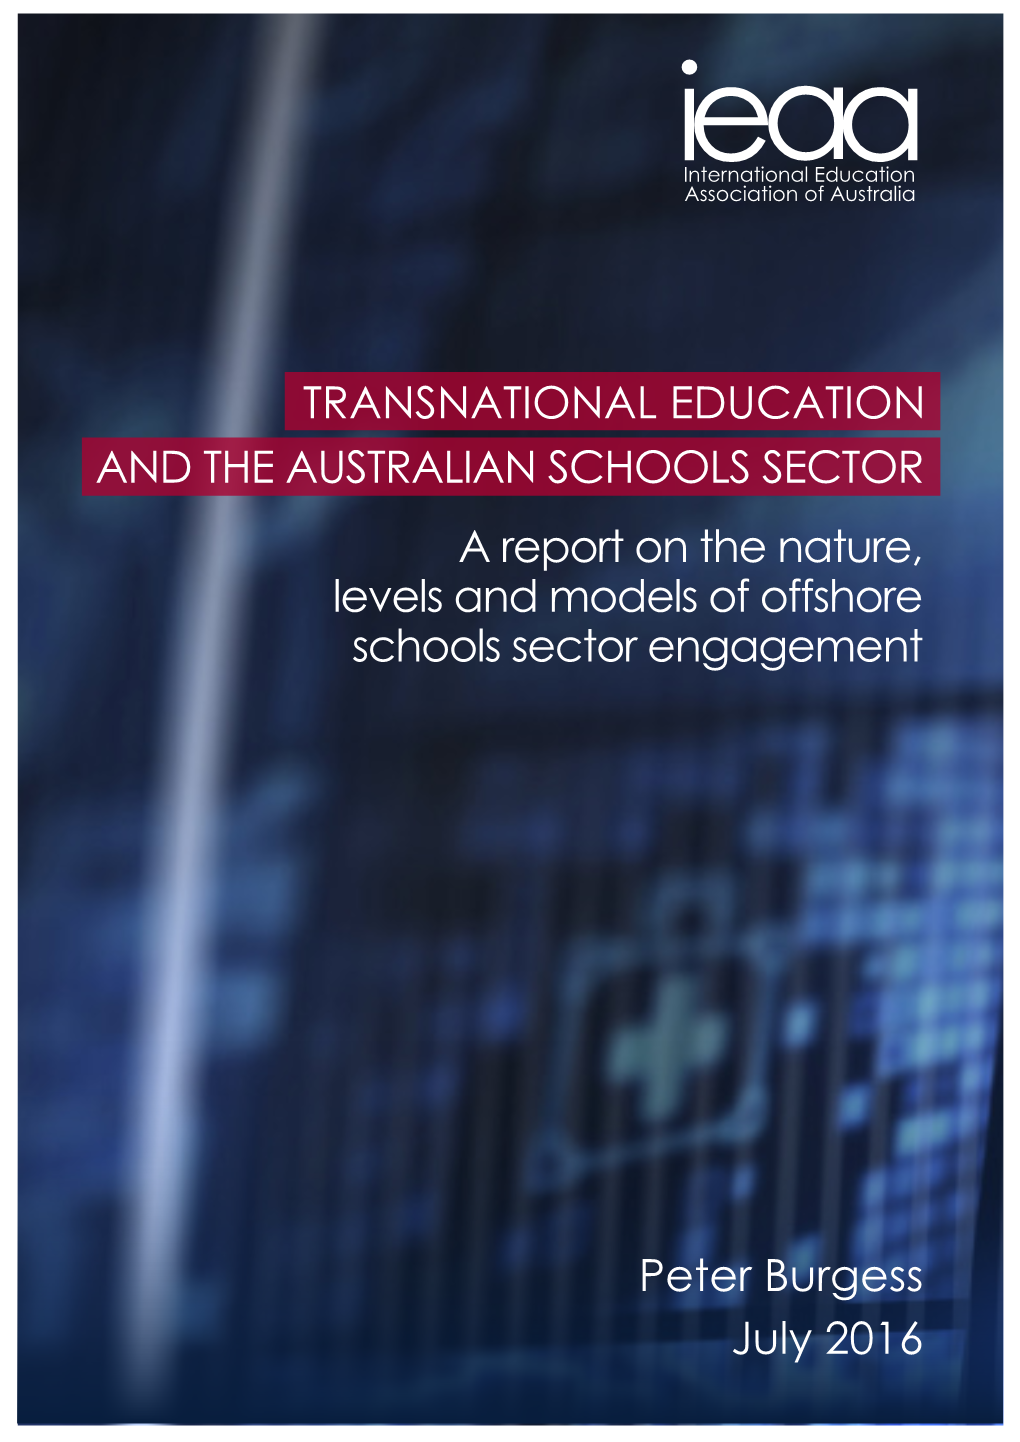 A Report on the Nature, Levels and Models of Offshore Schools Sector Engagement